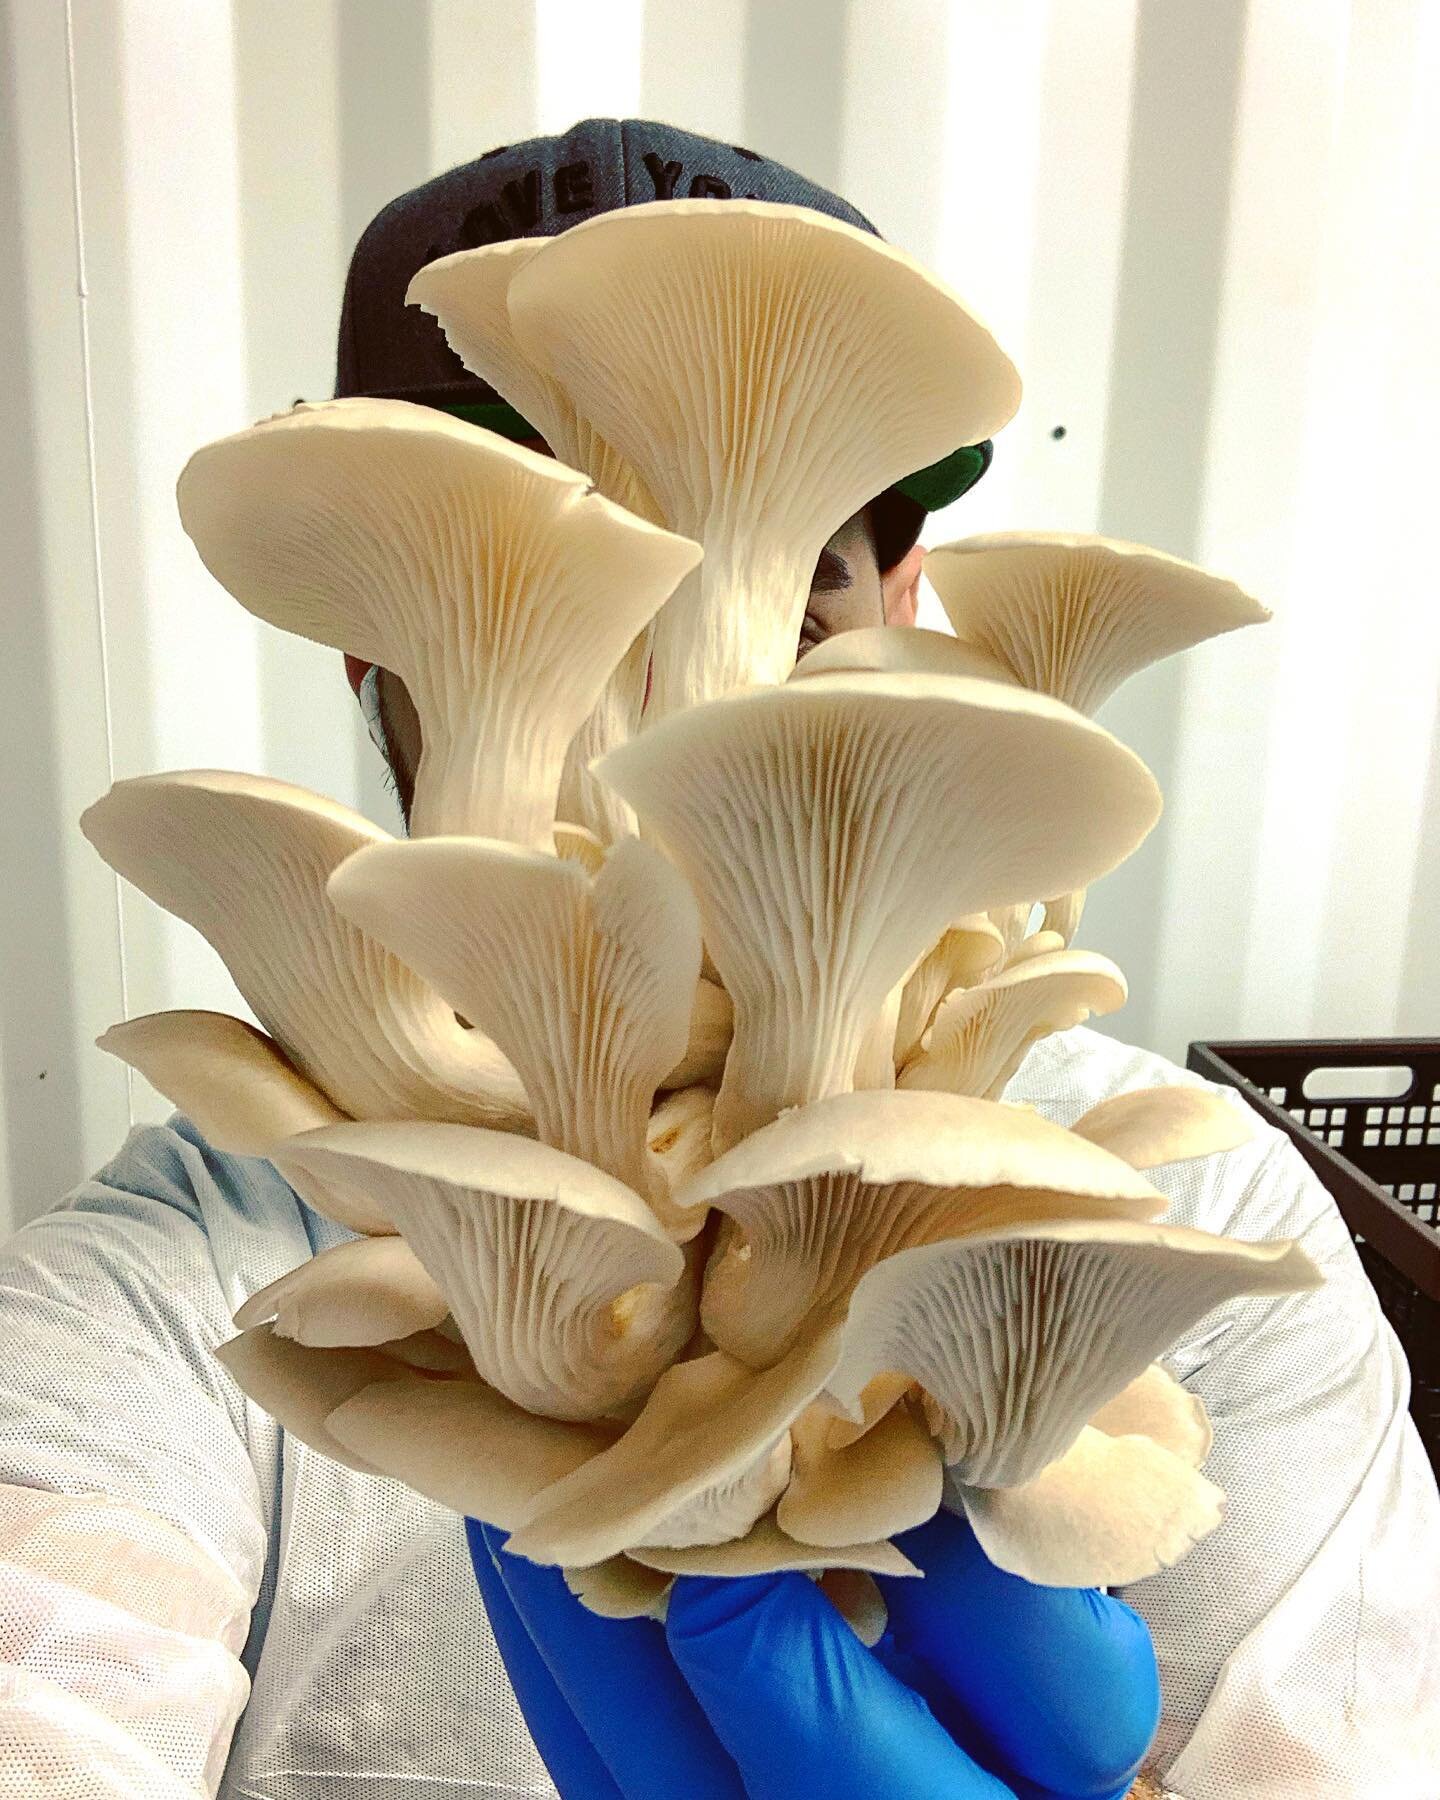 Elm Oysters, (Pleurotus Ostreatus) or tree oyster mushroom, is a common edible mushroom. It was first cultivated in Germany as a subsistence measure during World War I and is now grown commercially around the world for food. It is related to the simi